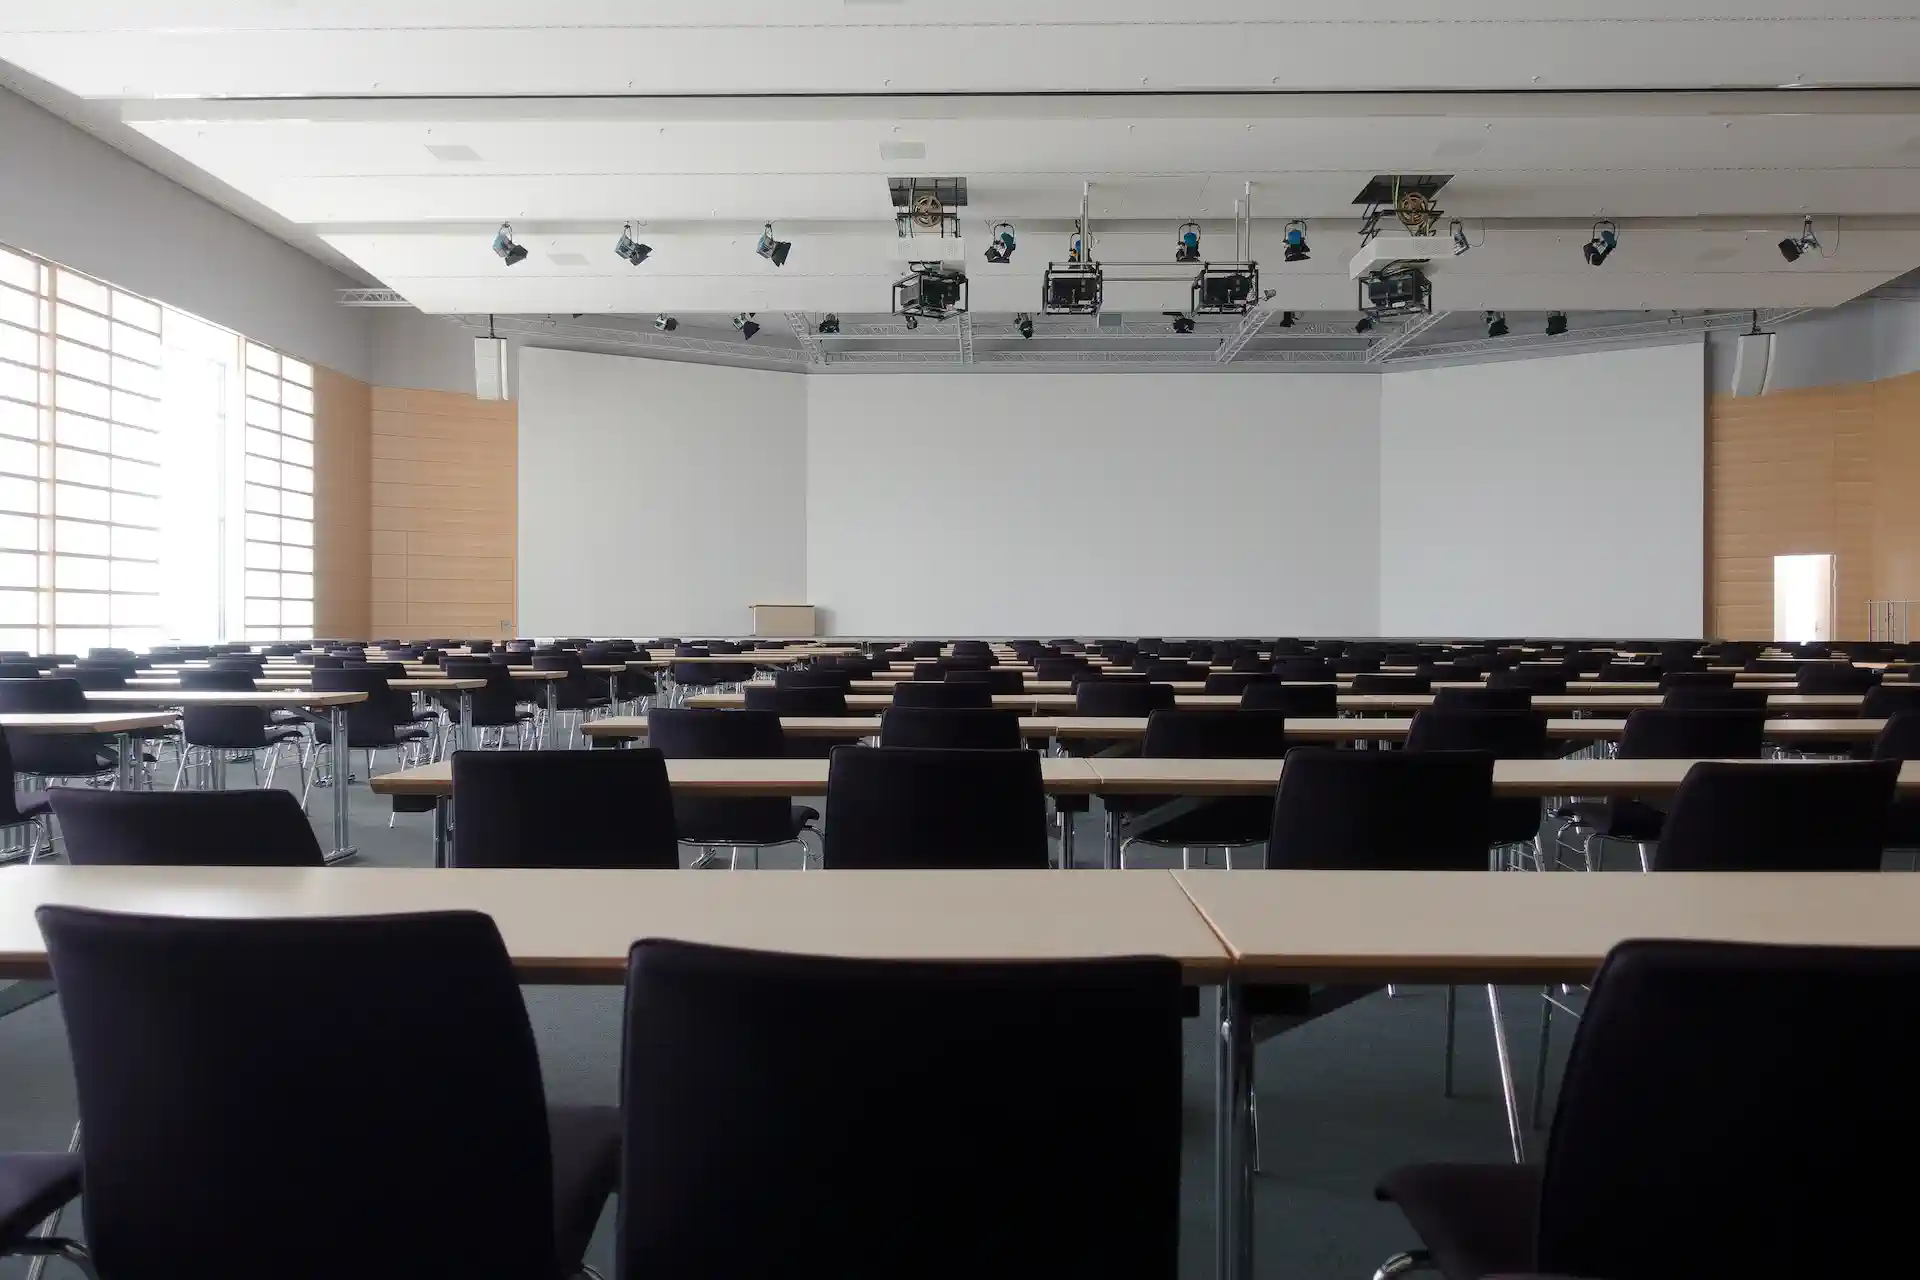 An image of an empty lecture theatre, taken from the back - whiteboards across the front wall, long wooden tables running in rows across the room, seats lined up ready to take students. 